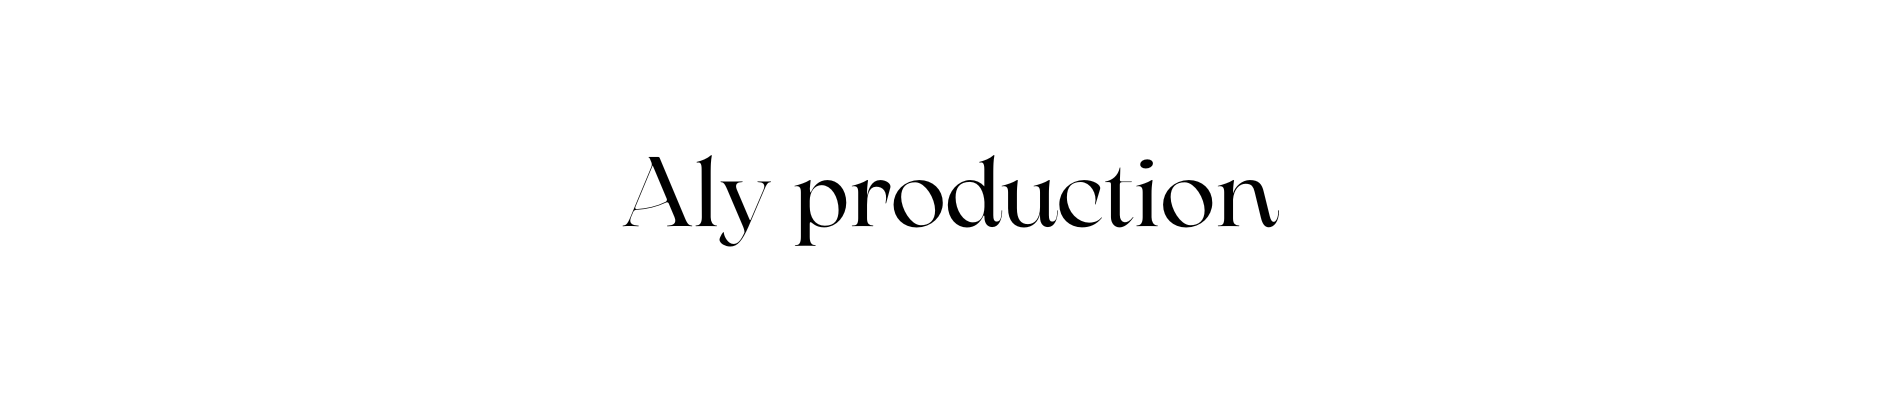 Aly production